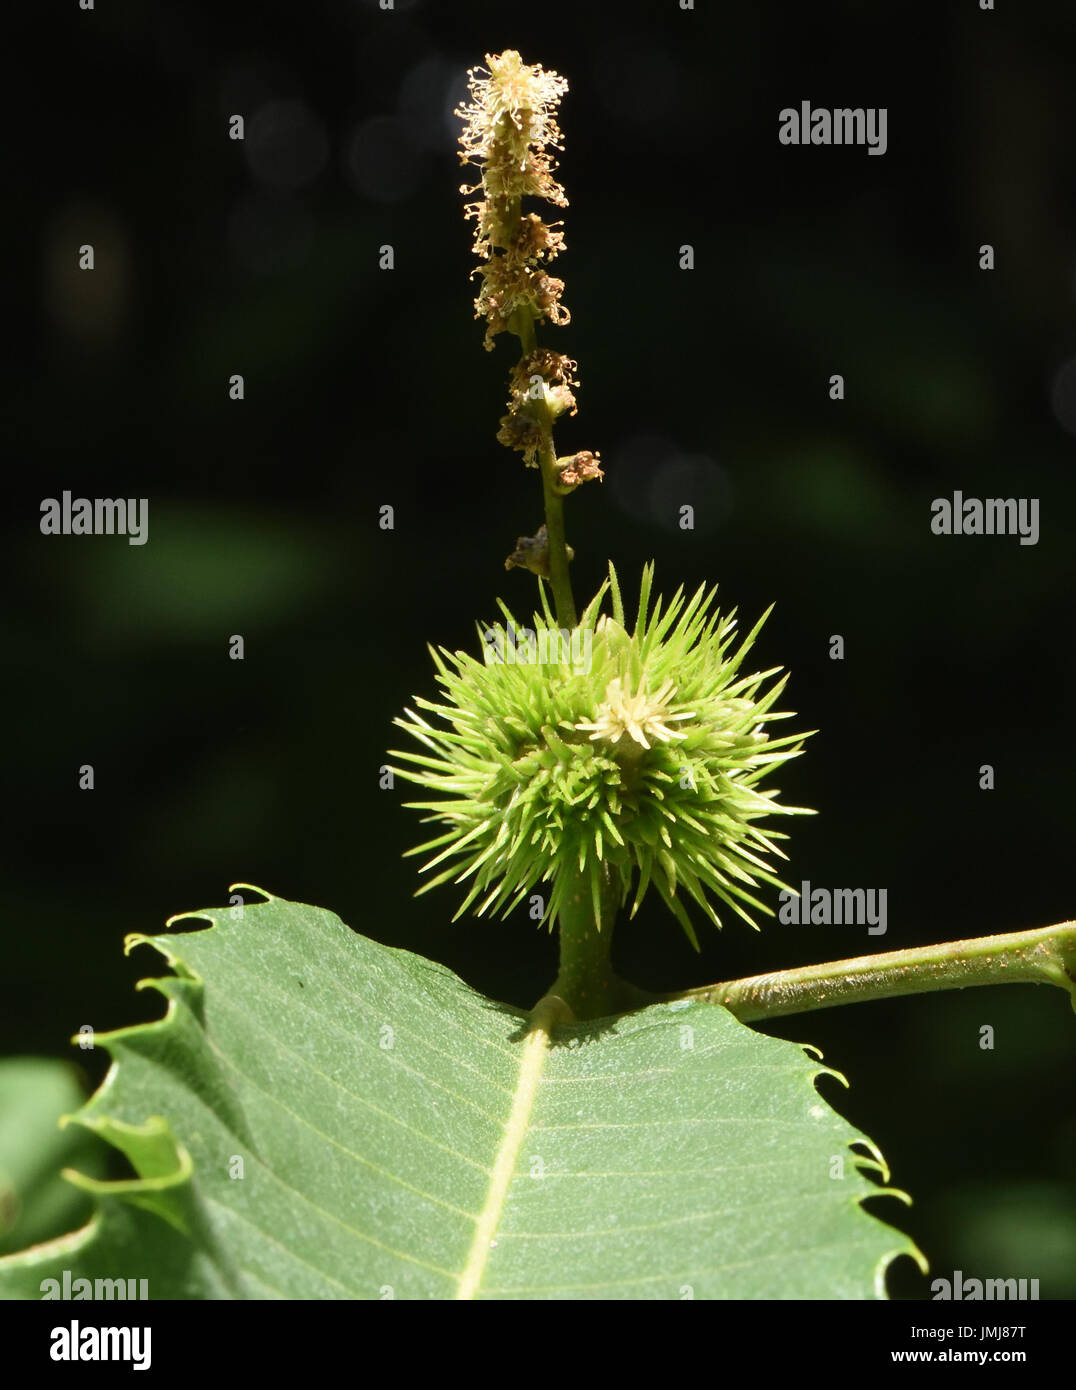 Male and female flowers of Sweet chestnut (Castanea sativa). The male flowers are on the stalk above the pale yellow female flowers, Stock Photo